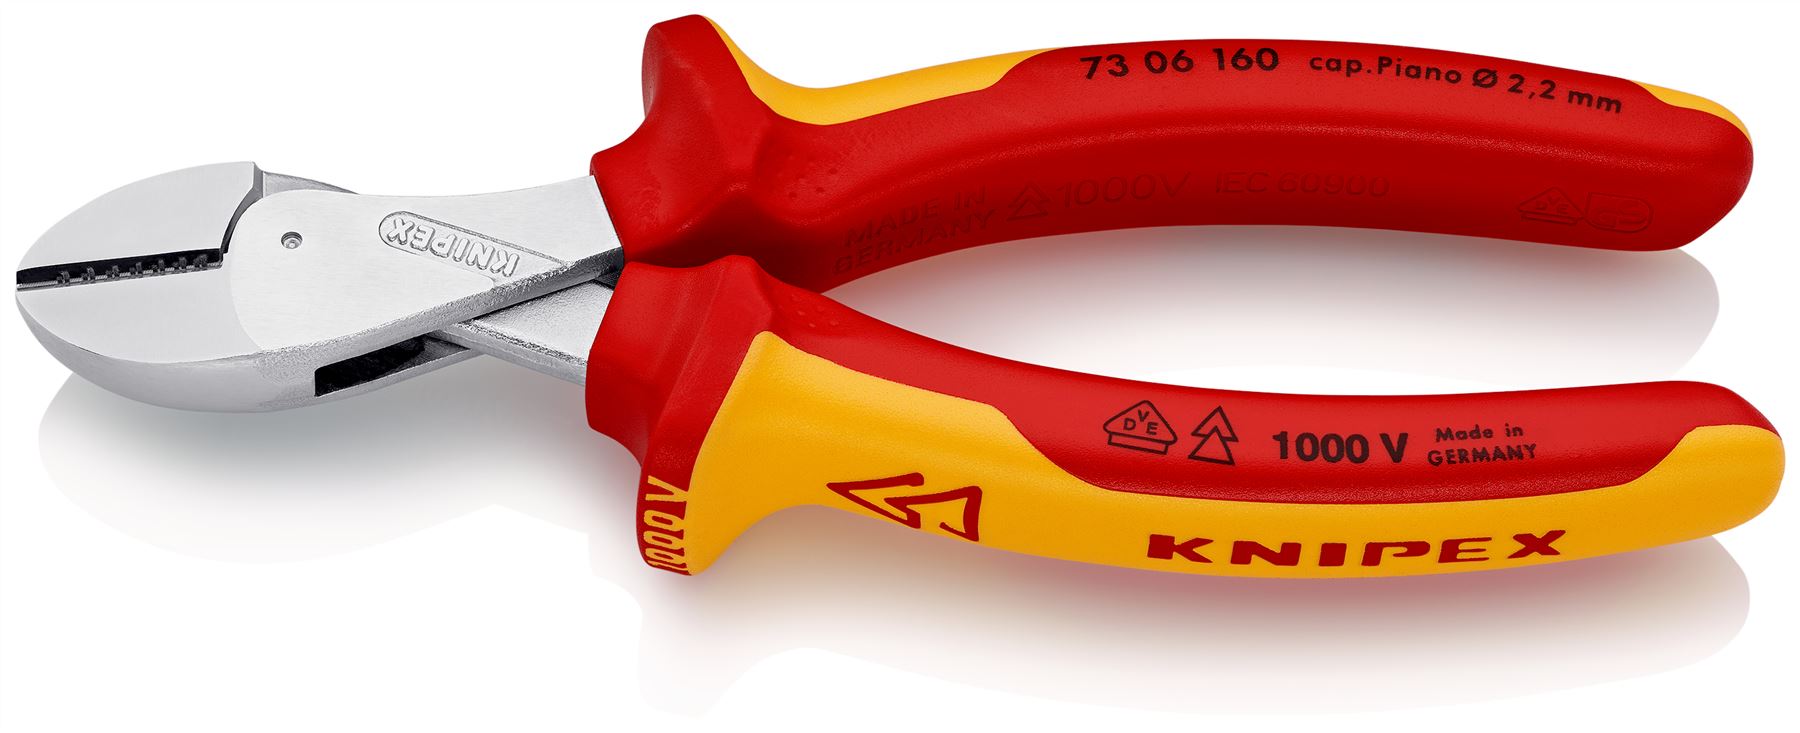 Knipex X-Cut Diagonal Side Cutting Pliers 160mm VDE Tested 1000V Chrome Plated 73 06 160